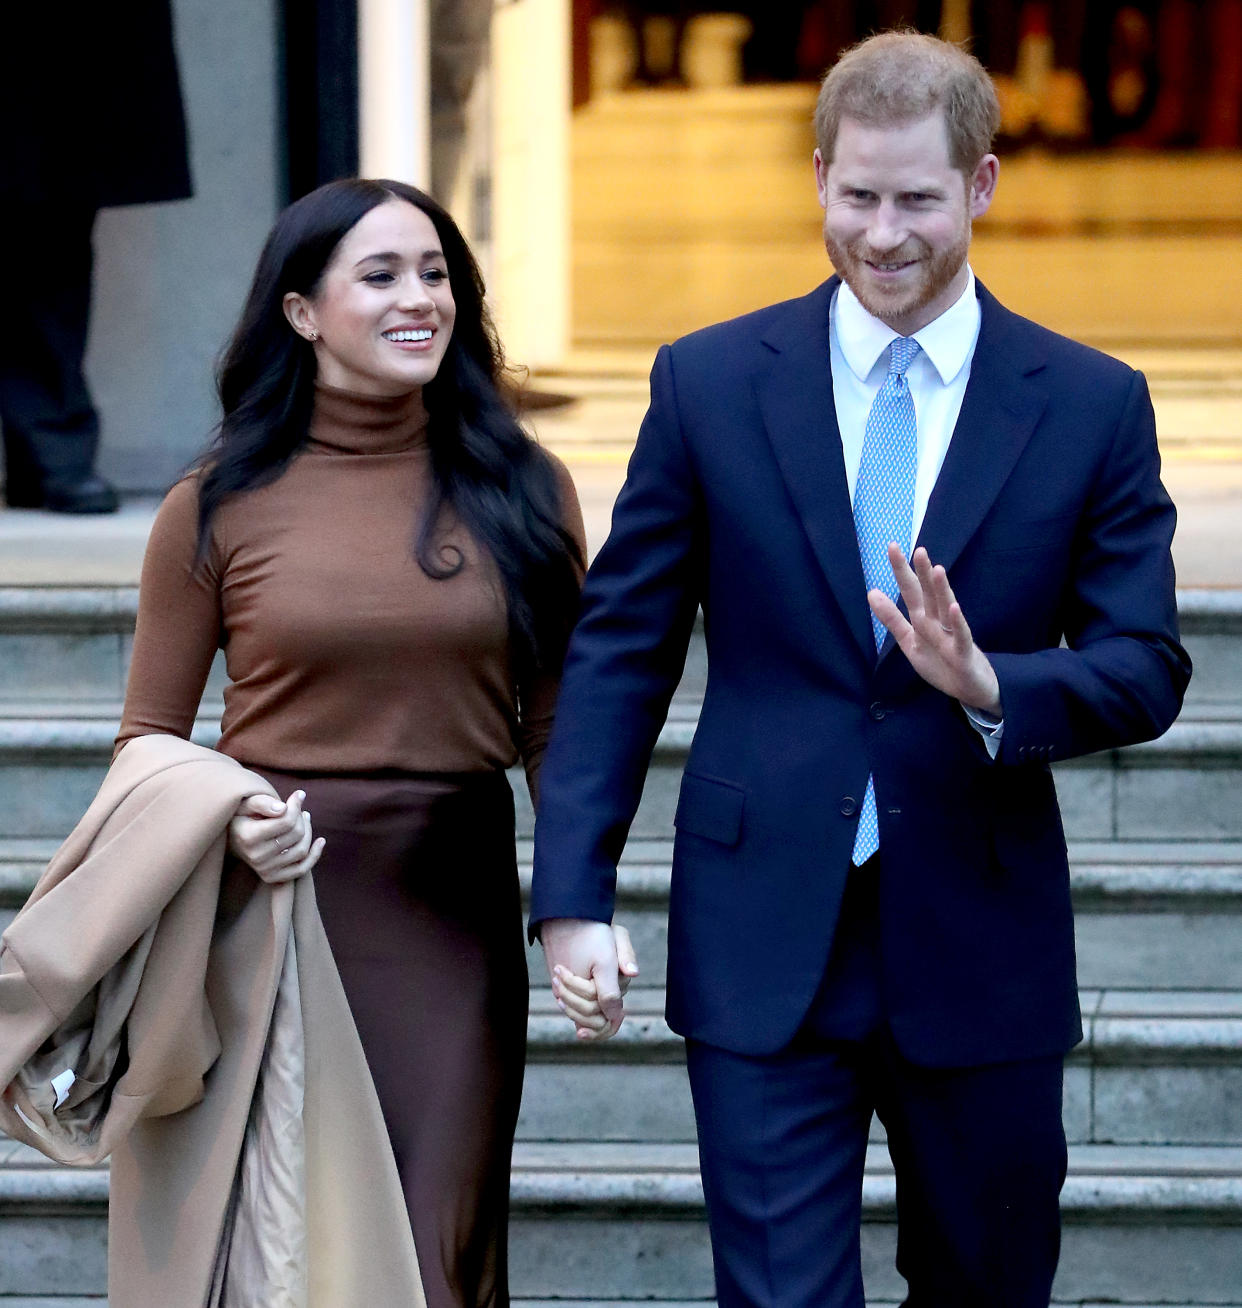 President Trump (not pictured) weighed in on Meghan Markle and Prince Harry's announcement to step back from their royal duties. (Photo by Chris Jackson/Getty Images)